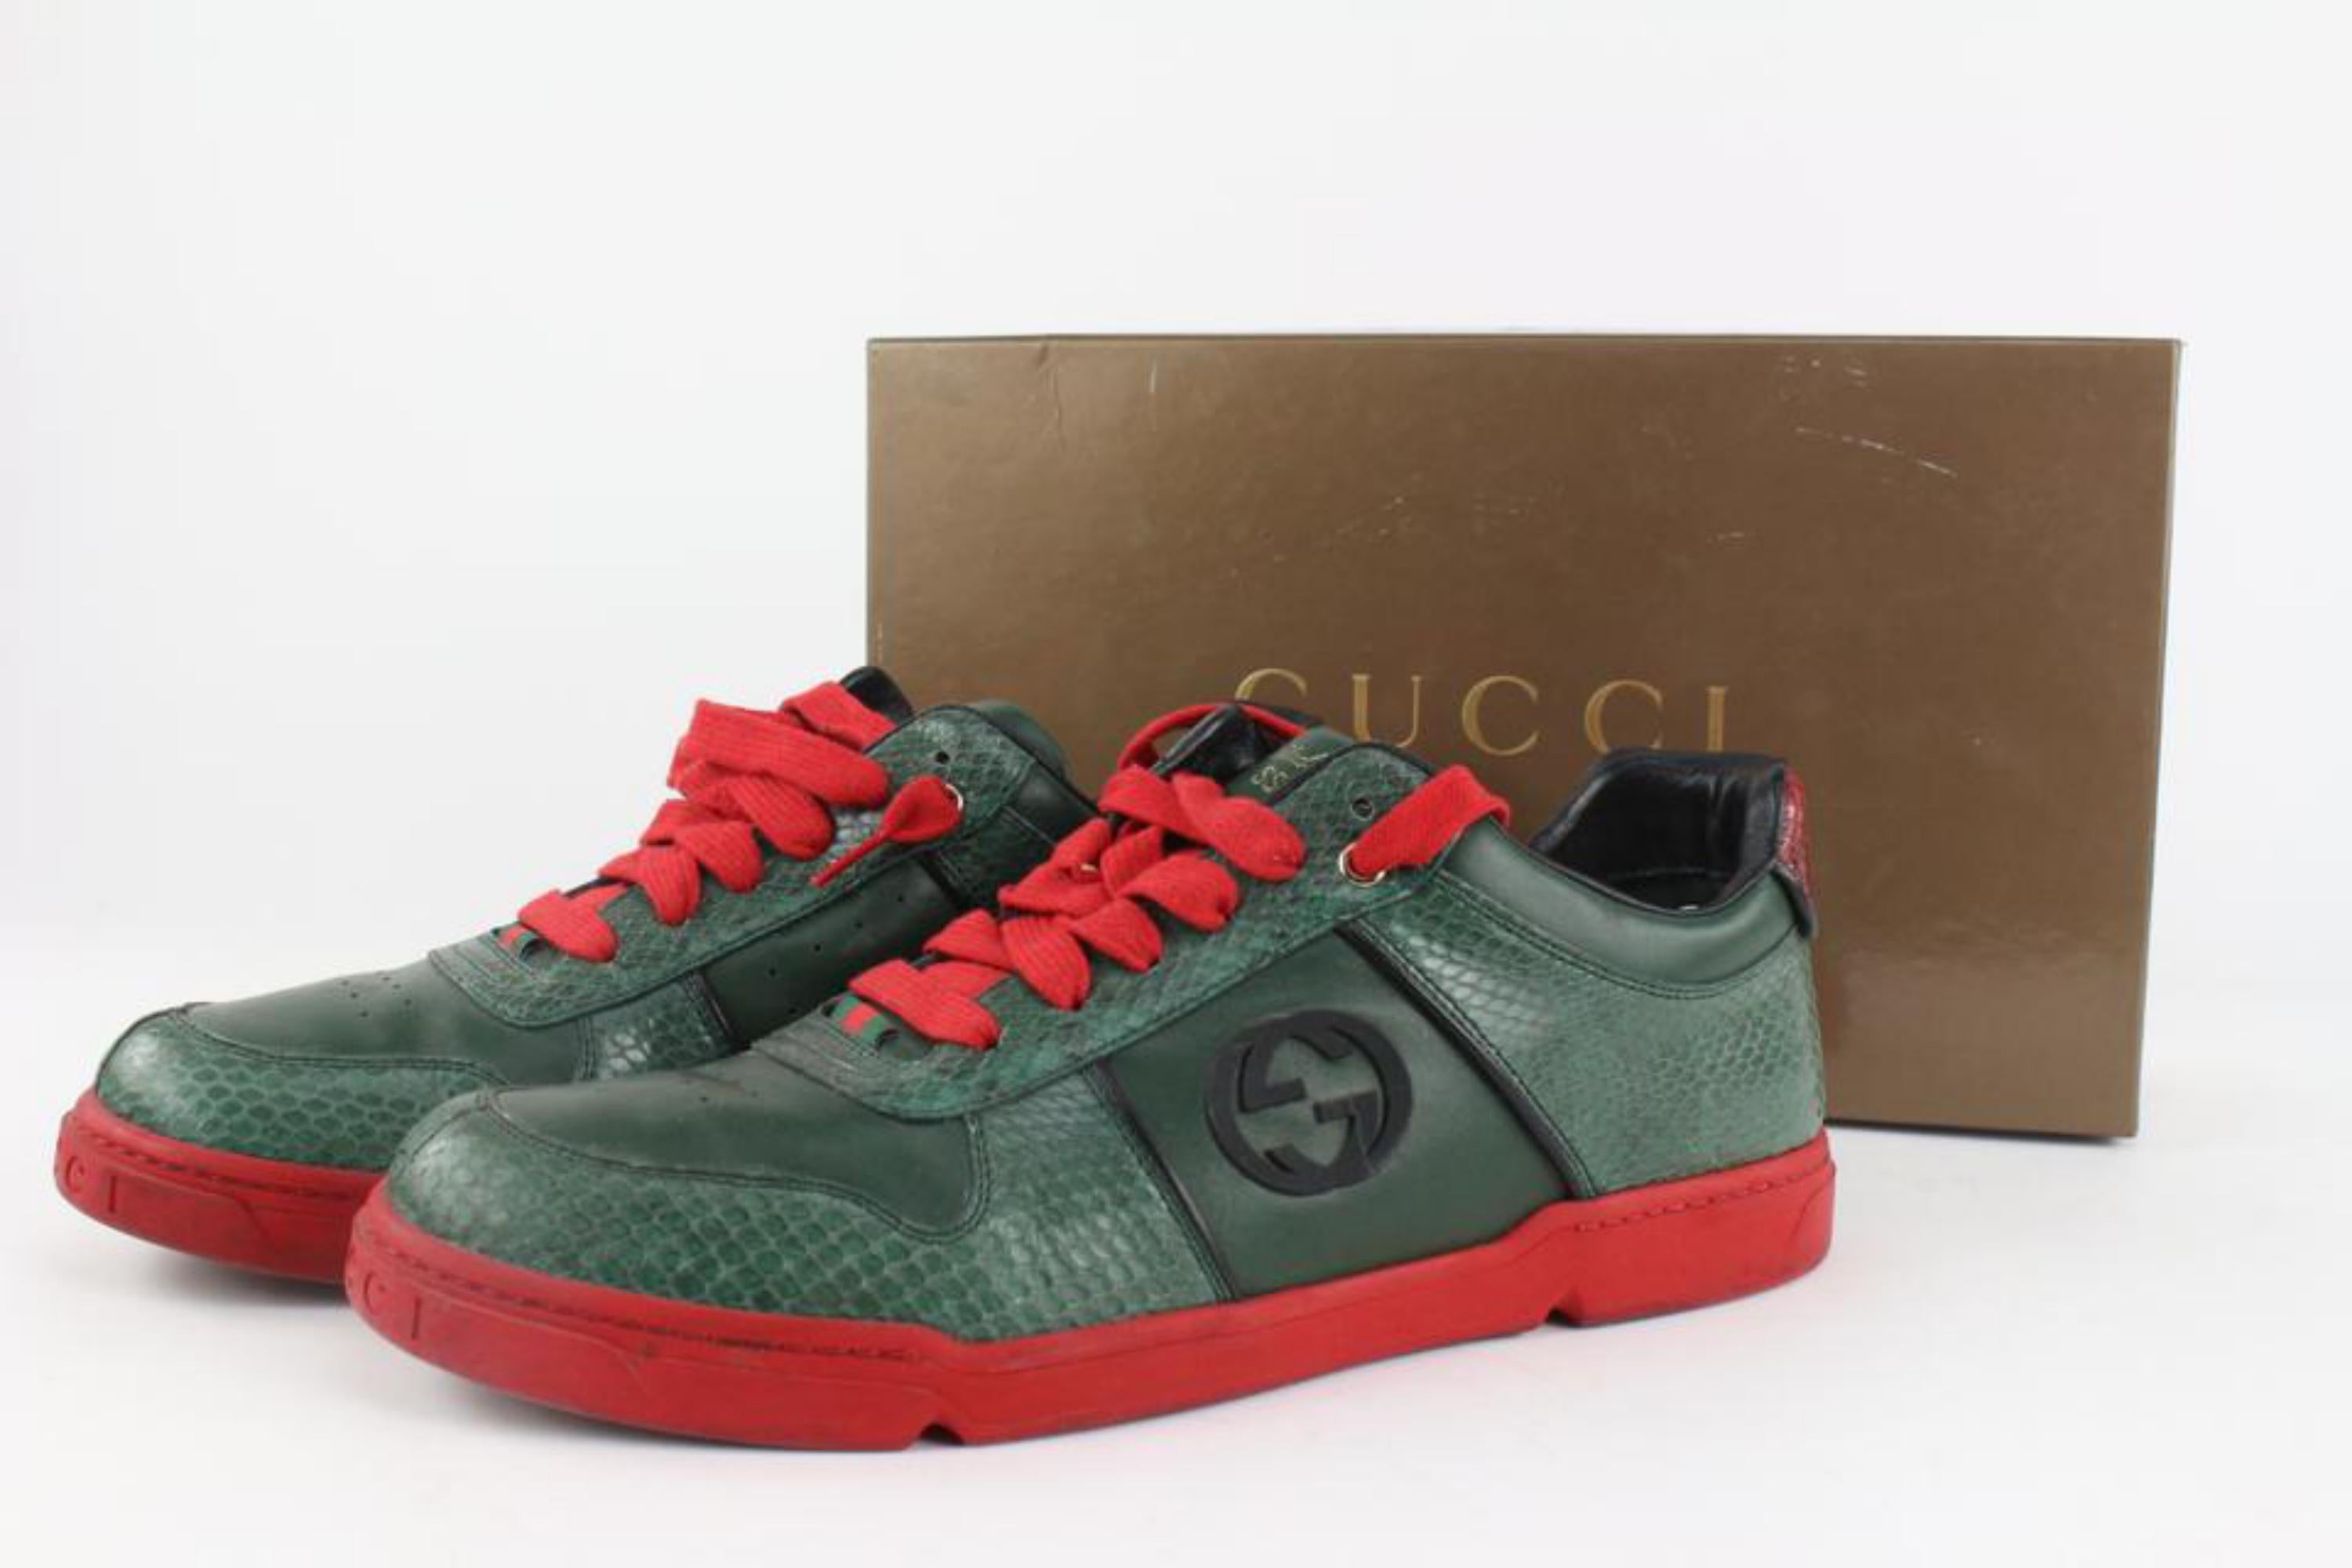 Gucci Men's 12.5 US Red x Green Python Low Top Classic Sneaker 1gg1112
Date Code/Serial Number: 162679 12G
Made In: Italy

OVERALL GOOD  CONDITION
( 7/10 or B ) 
Accessories: Box 
Signs of Wear:
Size: 12 G or Men's 12.5 US
Exterior:  Some Fading,